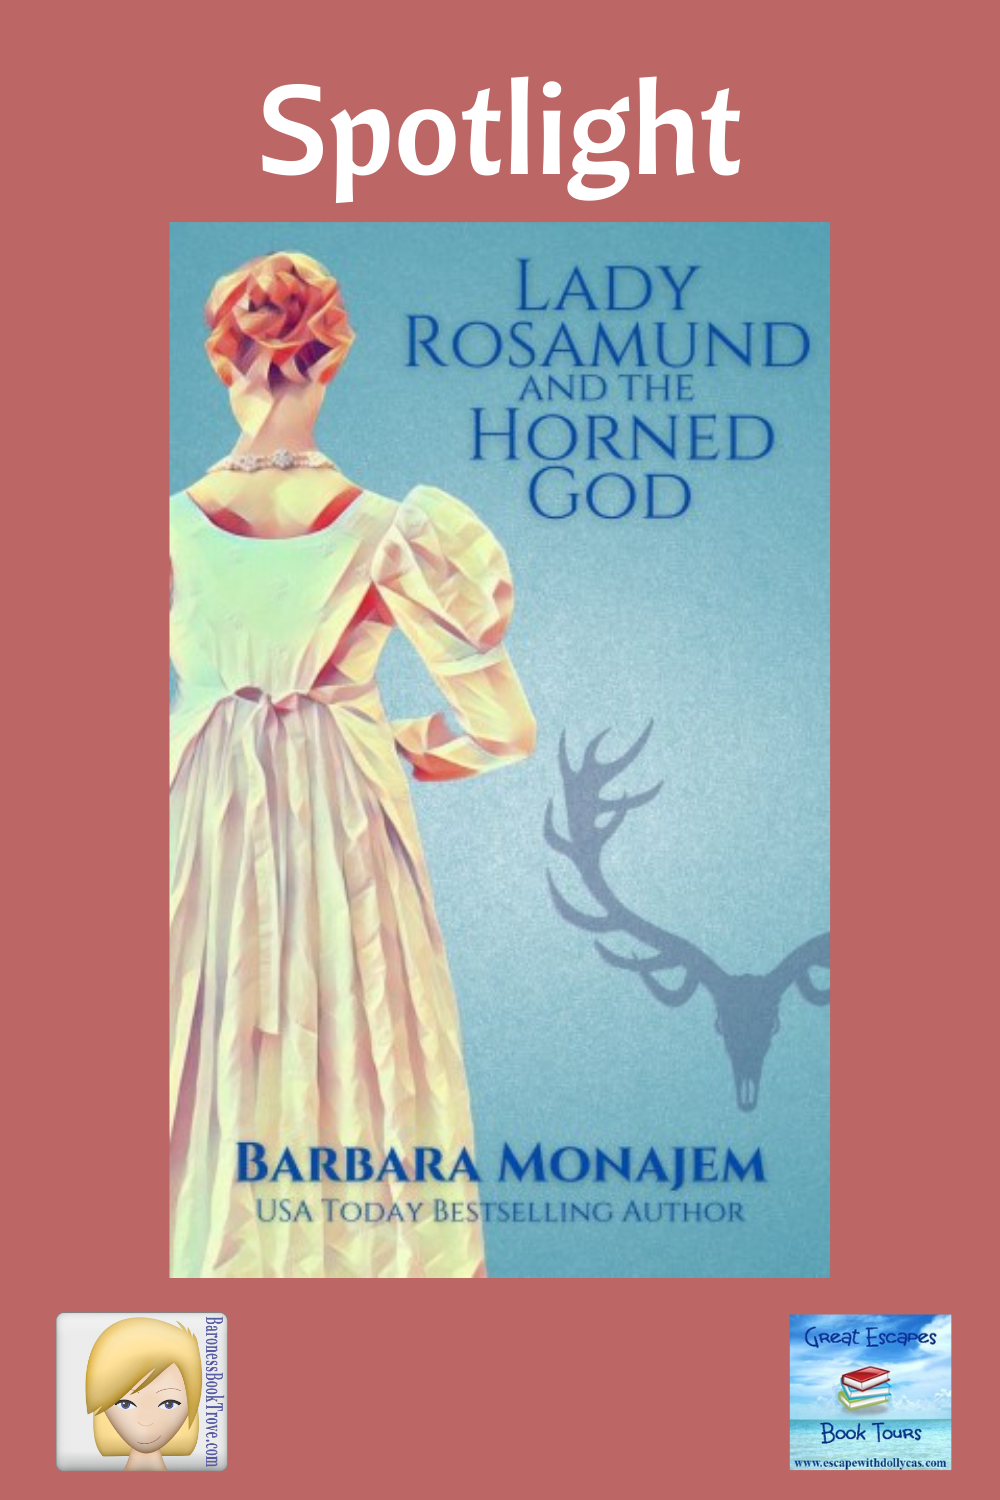 Lady Rosmund and the Horned God